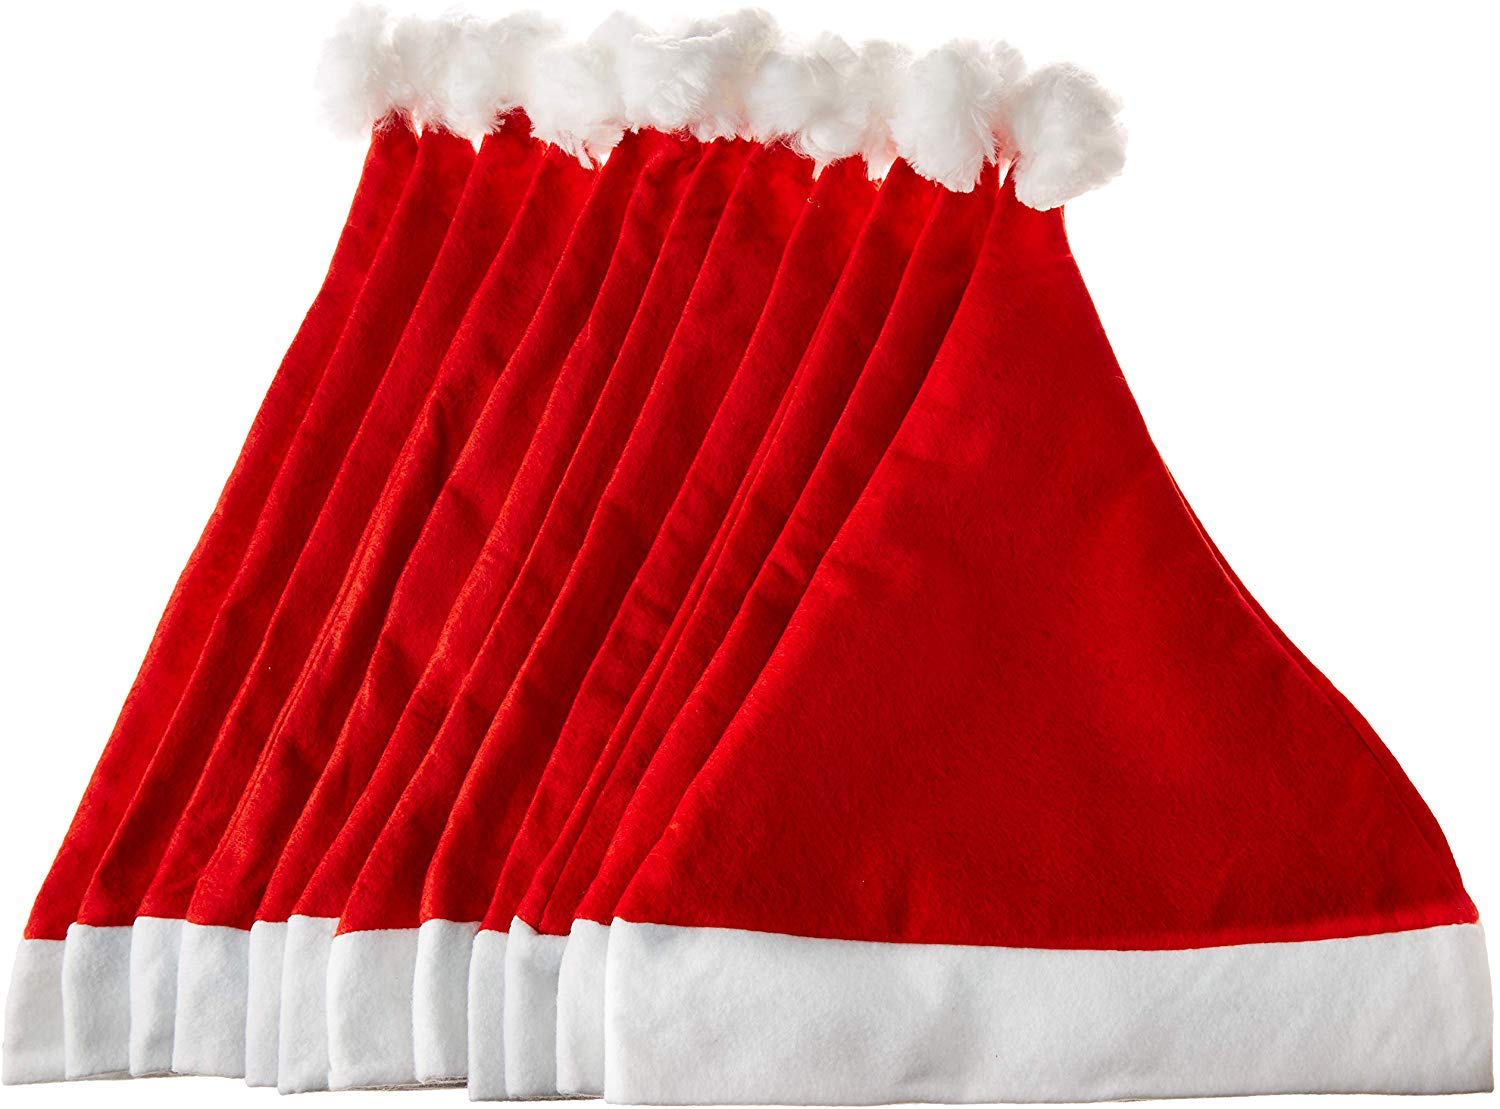 eCraftIndia Red and White Merry Christmas Hats, Santa Claus Caps for kids and Adults - Free Size XMAS Caps, Santa Claus Hats for Christmas, New Year, Festive Holiday Party (Set of 12) 4